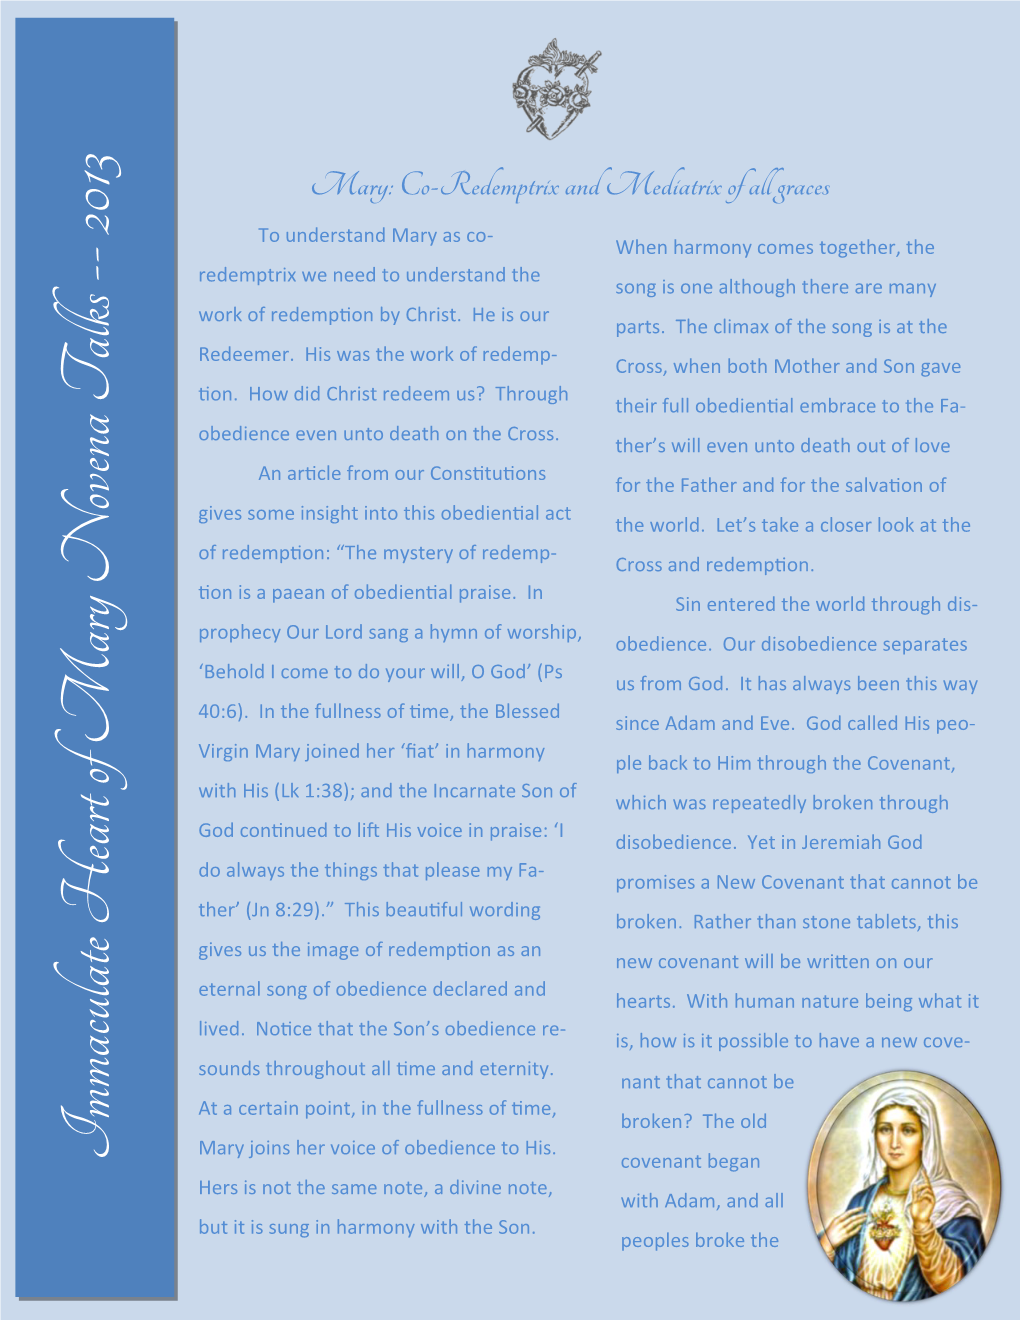 Immaculate Heart of Mary Novena Talks -- 2013 Work of Redemption by Christ